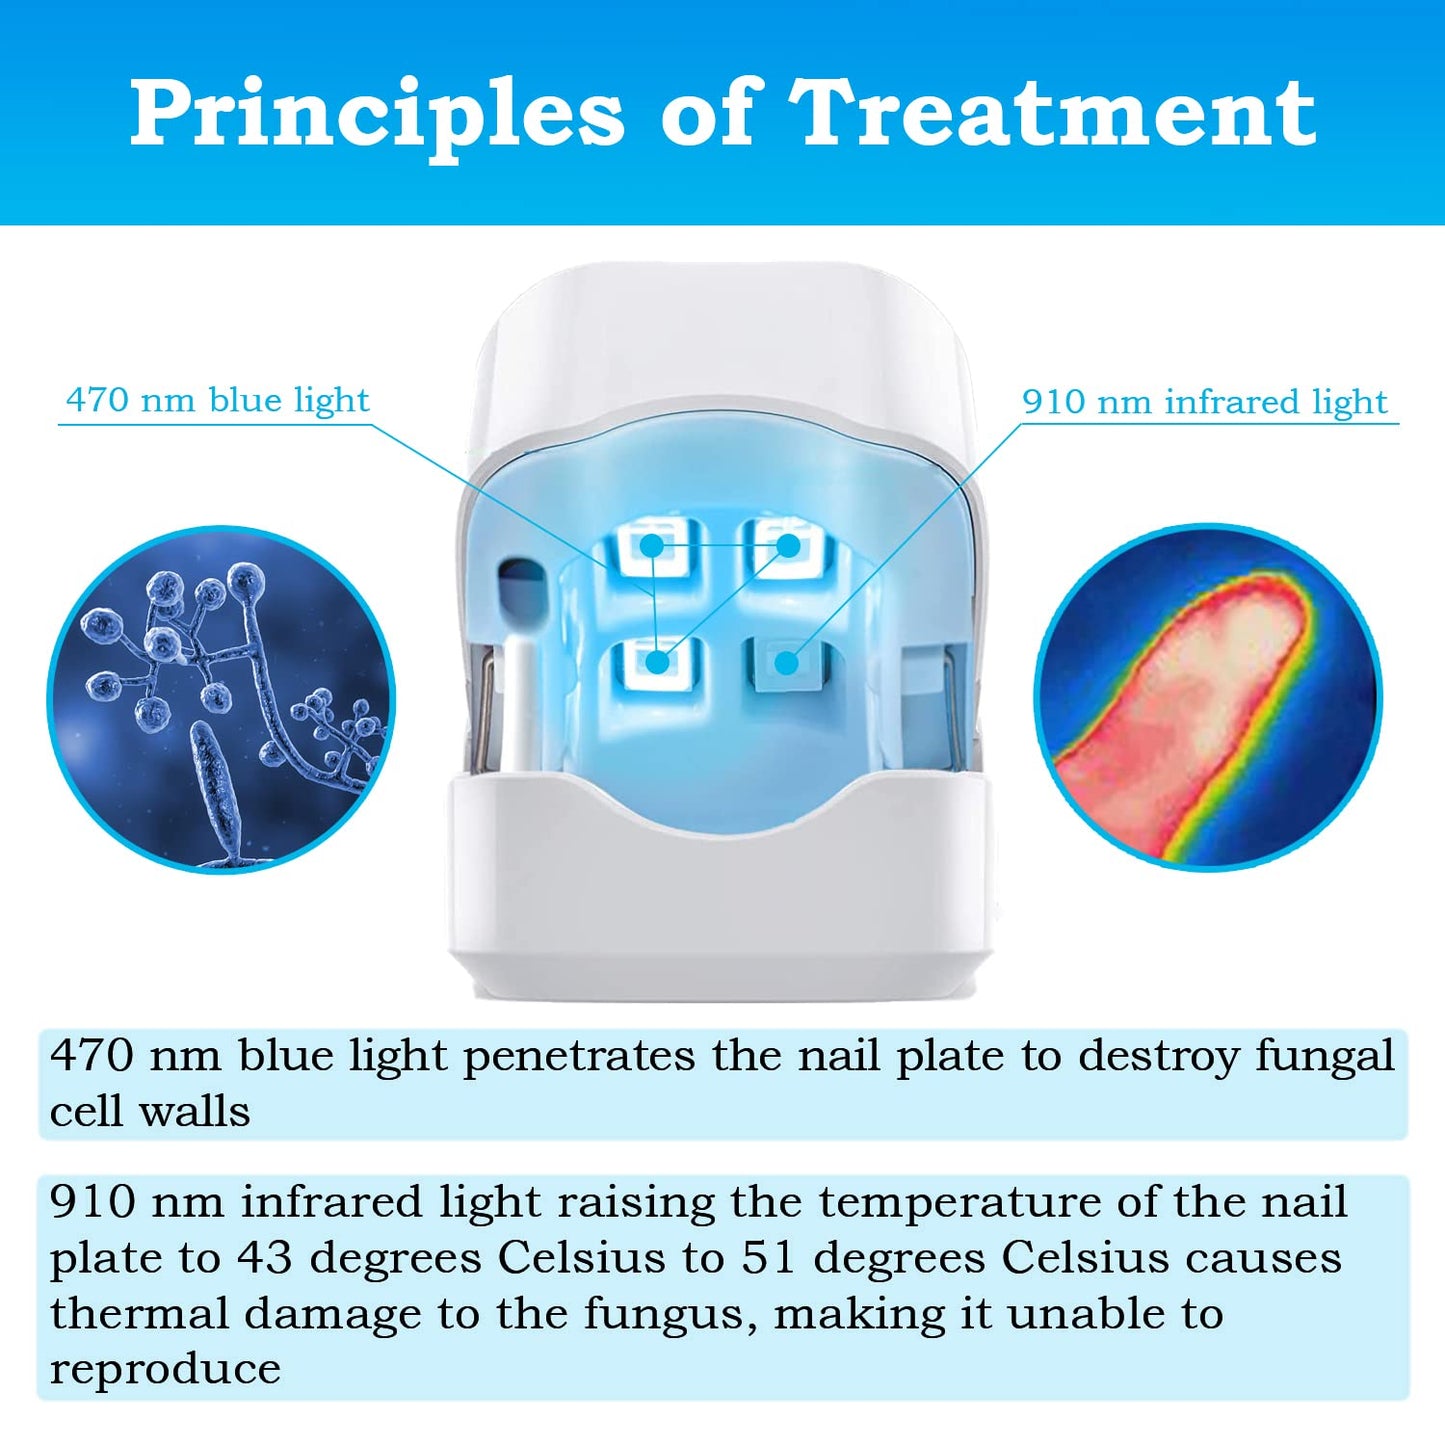 BEPHON Nail Fungus Cleaning Laser Treatment Device - Effective Home-Use Therapy for Damaged, Discolored, and Thickened Toenails and Fingernails with 910nm Infrared and 470nm Blue Light